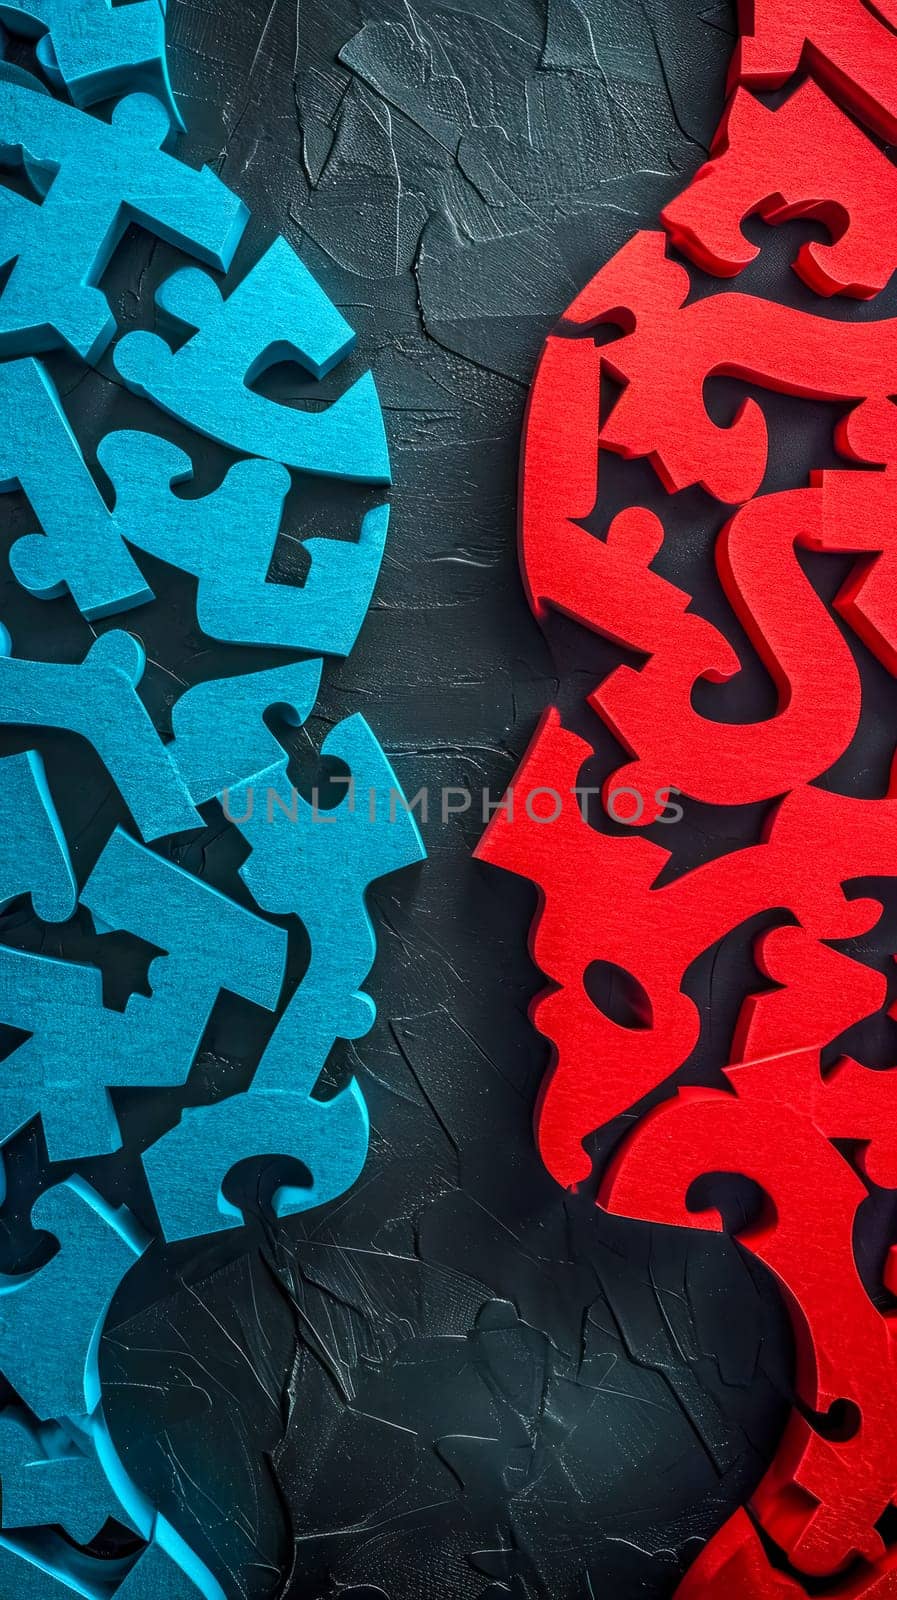 interlocking puzzle pieces in contrasting colors of blue and red, textured black background, complexity, connectivity, problem-solving, or the interplay between differing concepts or entities by Edophoto